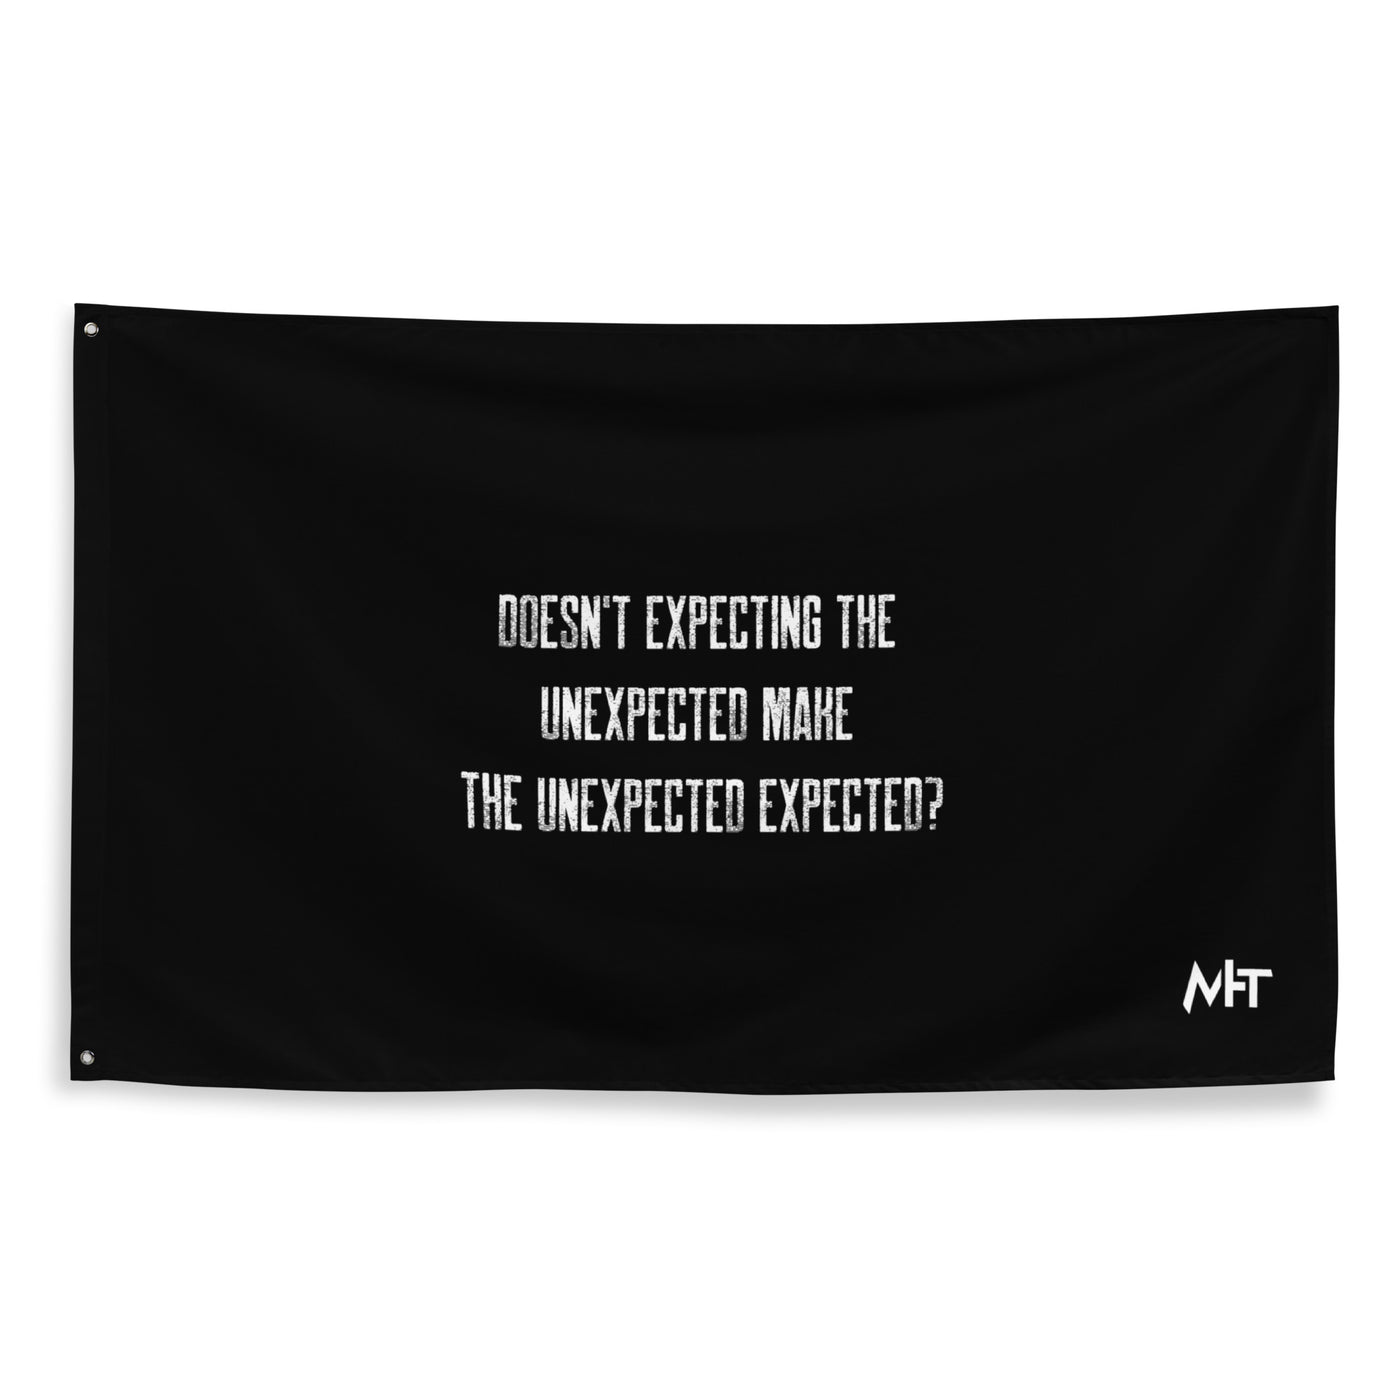 Doesn't expecting the unexpected make the unexpected expected V2 - Flag